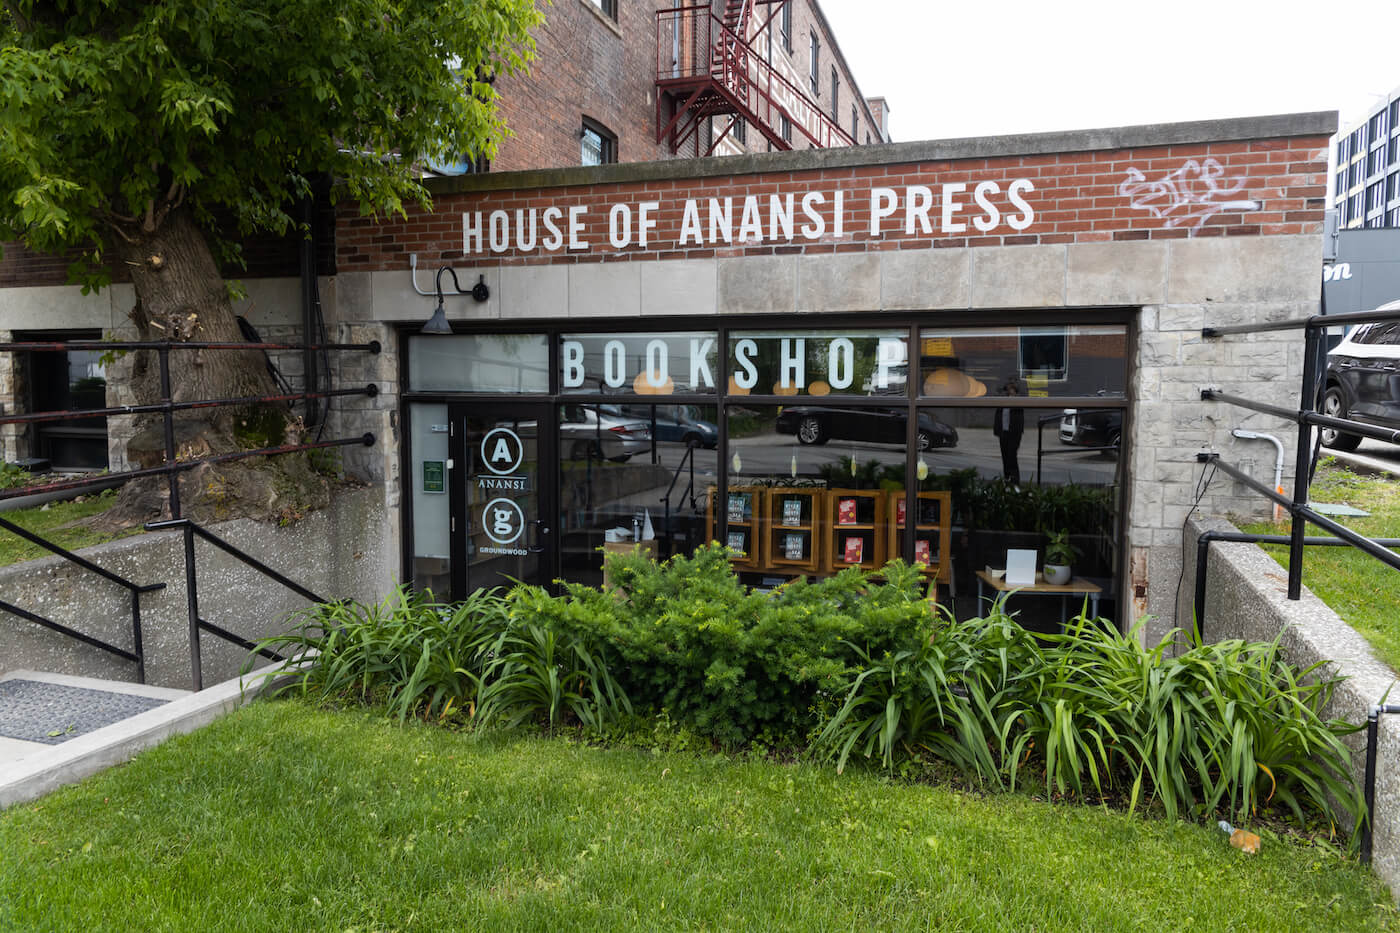 Things to do in Roncesvalles - House of Anansi Press